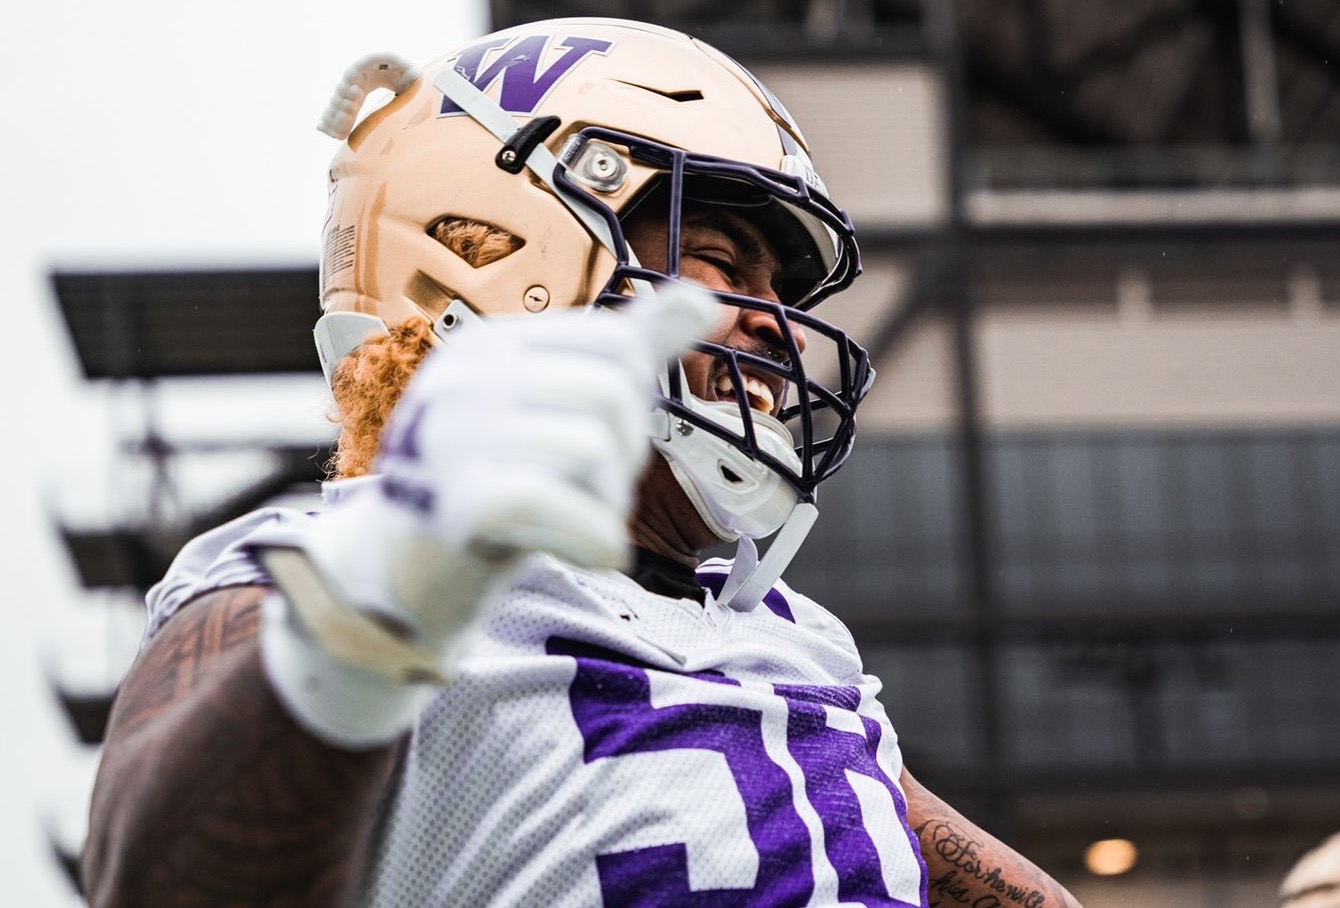 ZTF Appears on Mock Draft — Has He Played His Final UW Game?